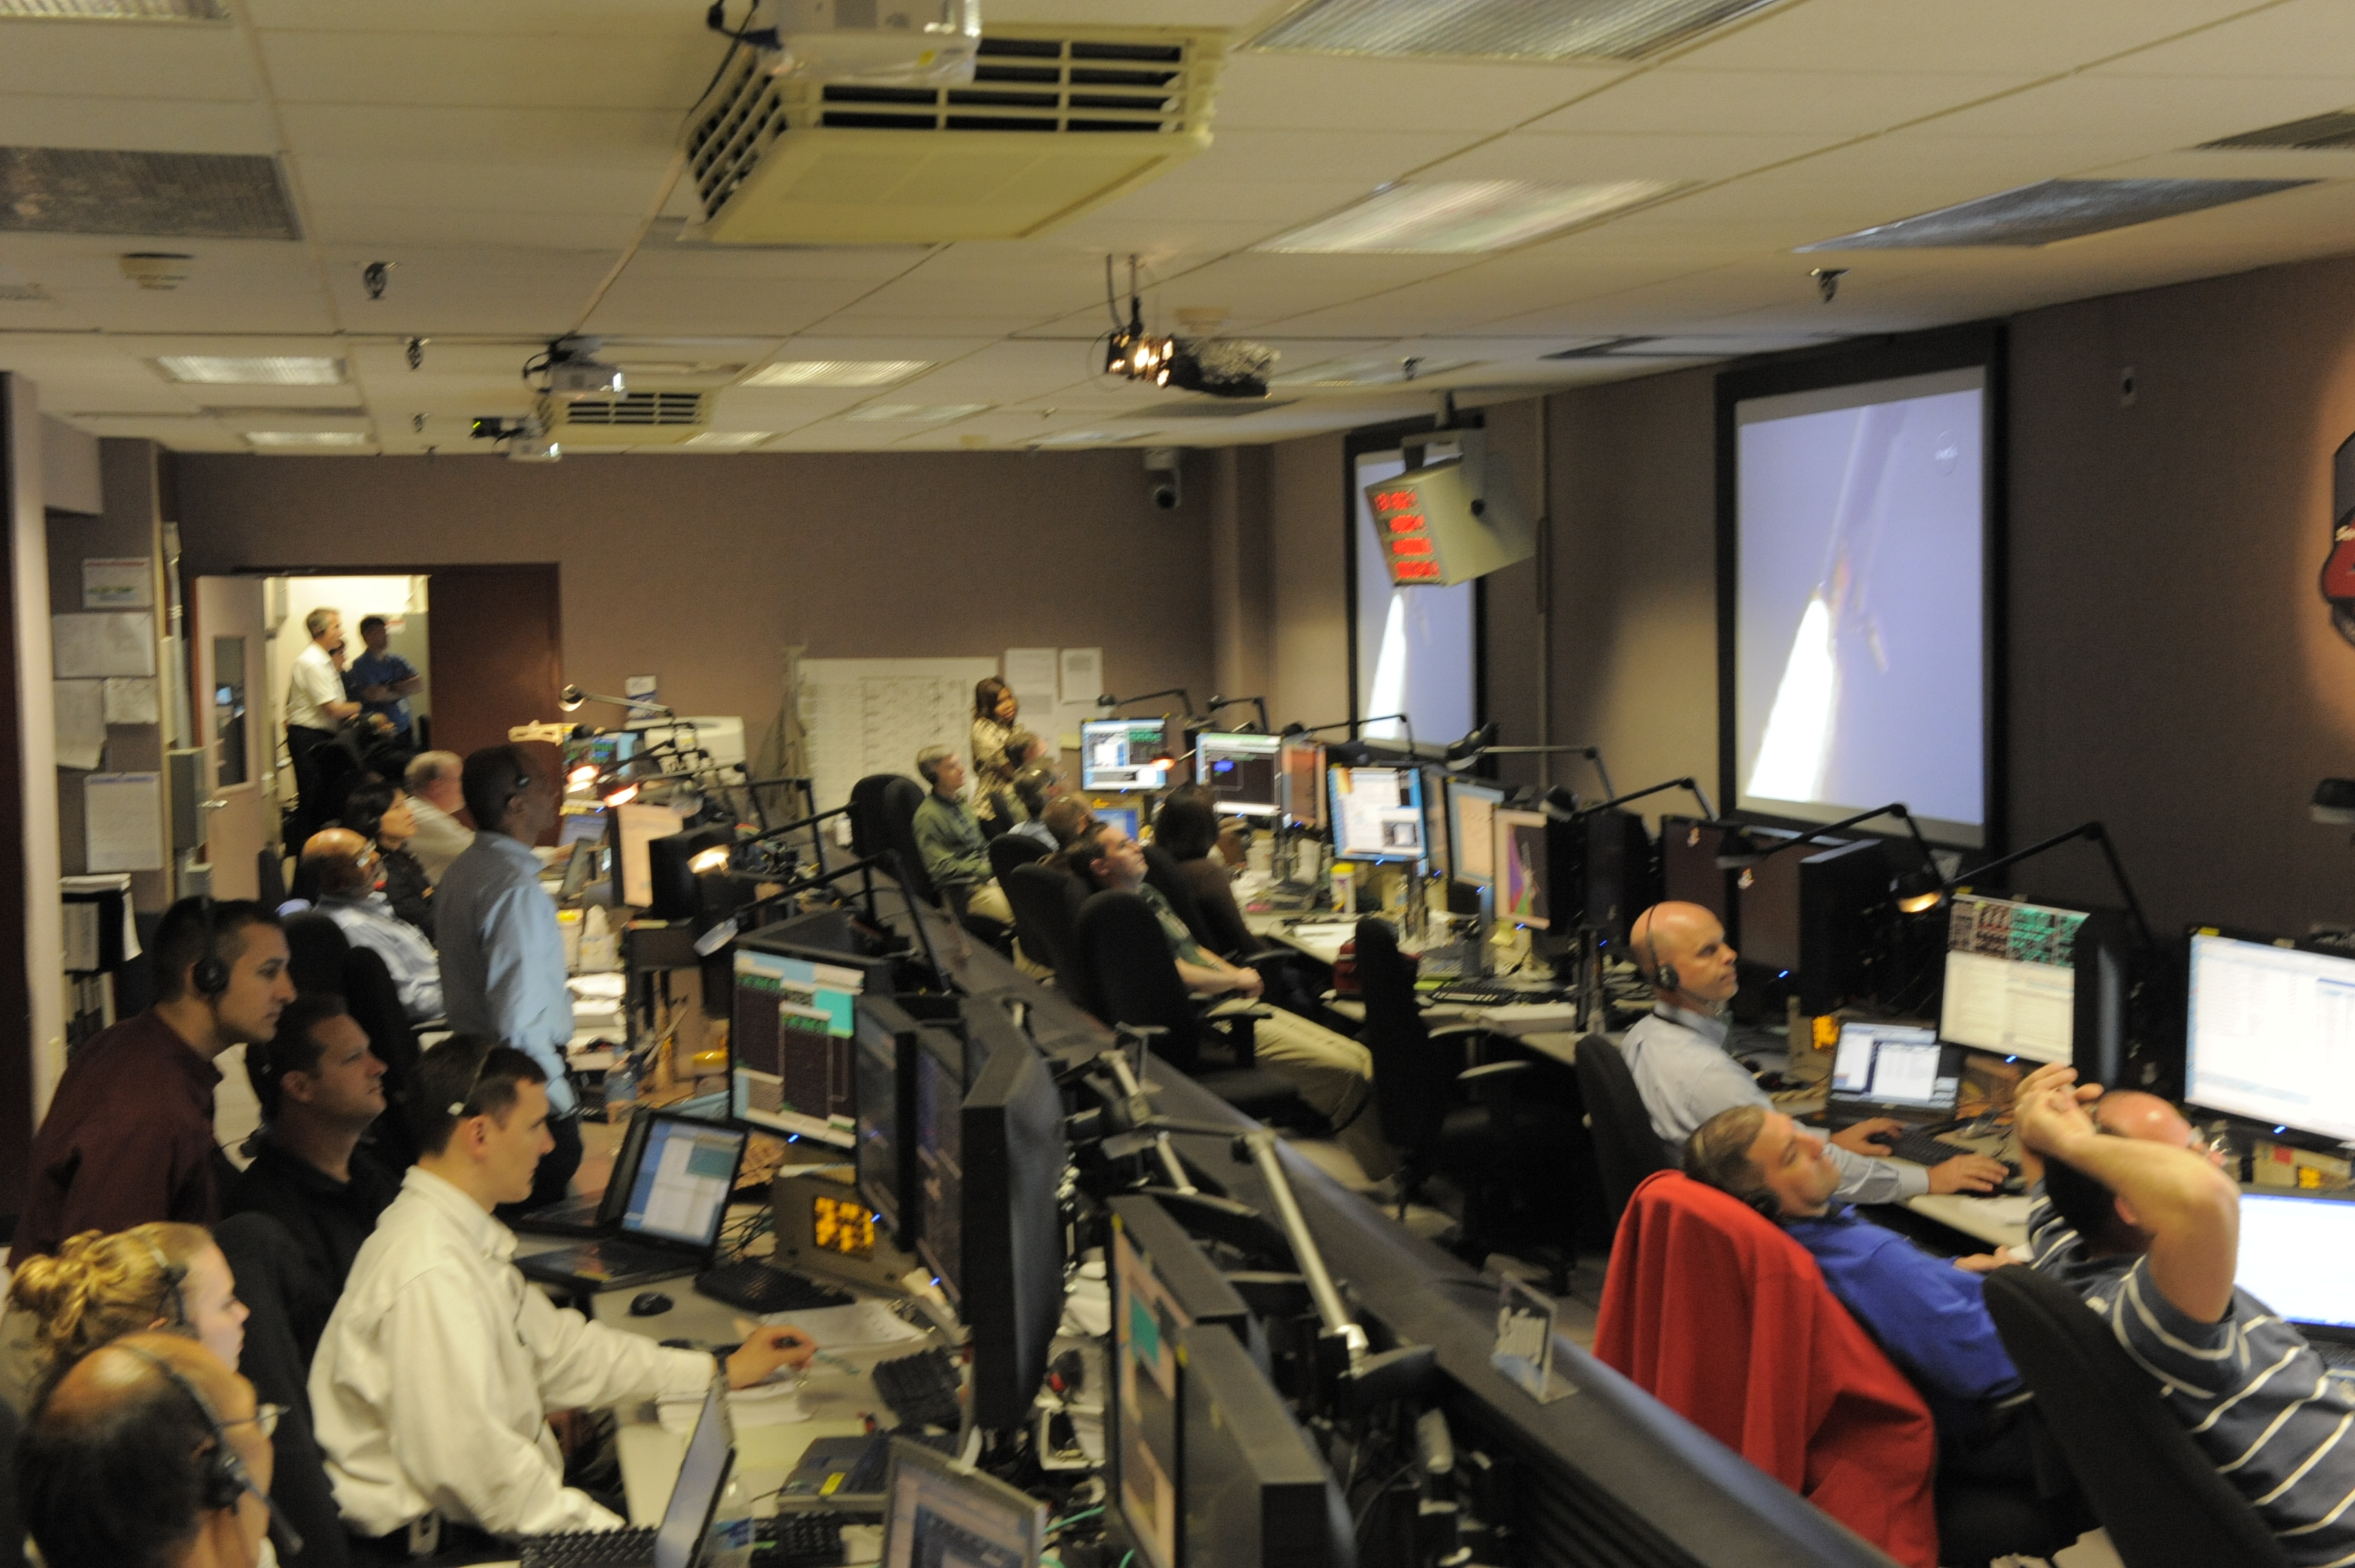 A fully staffed Hubble control center room watches the launch of a shuttle on the large screens.